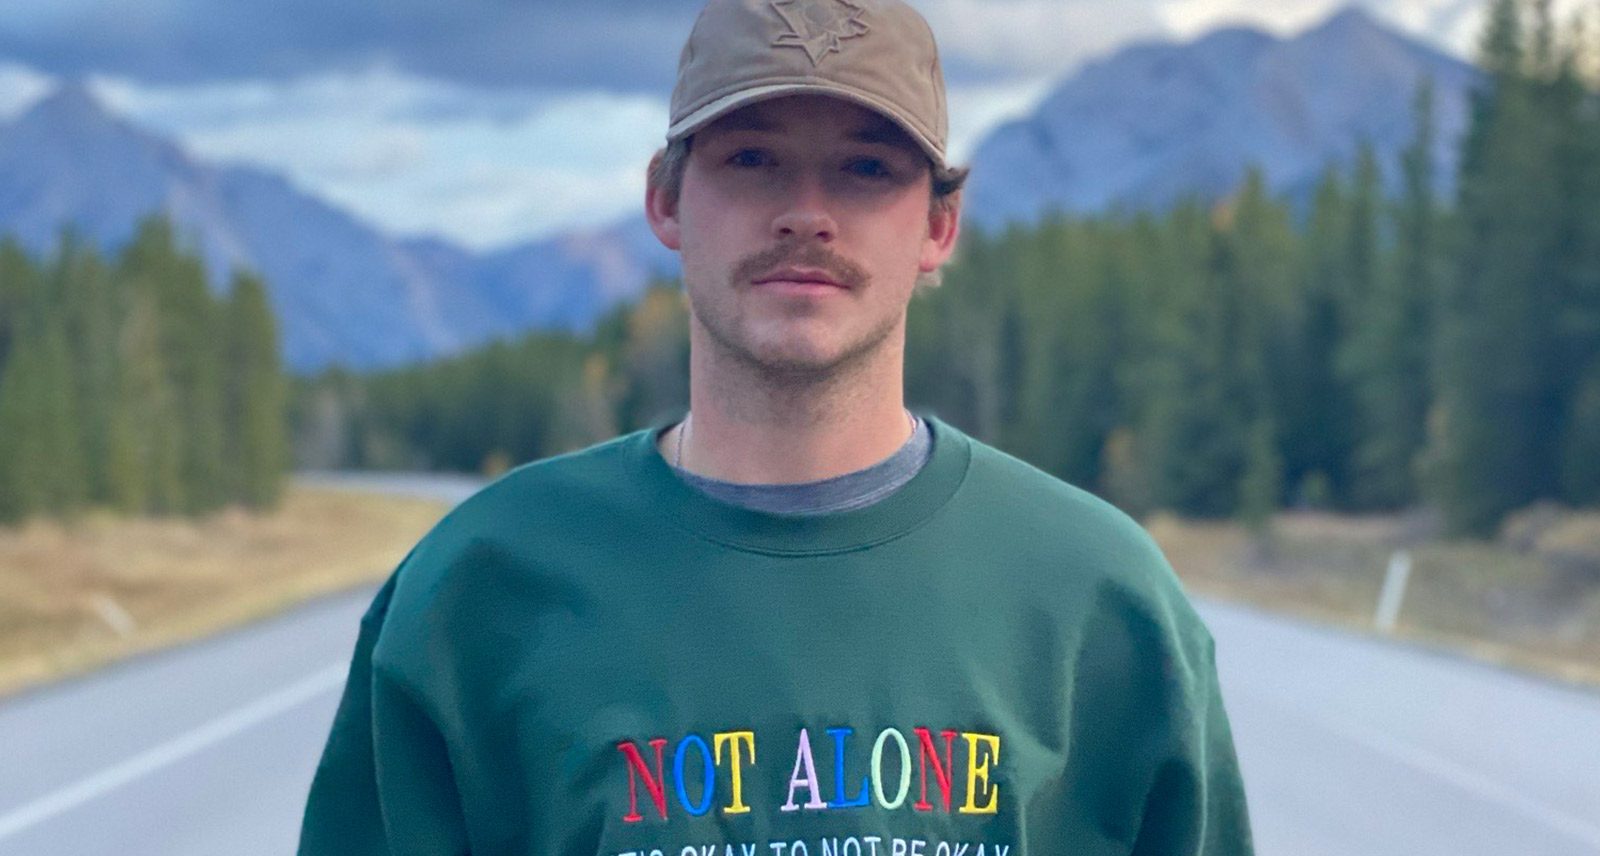 Movember Stories: Tyler Smith Wants You to Know That "It's OK to Not be OK"